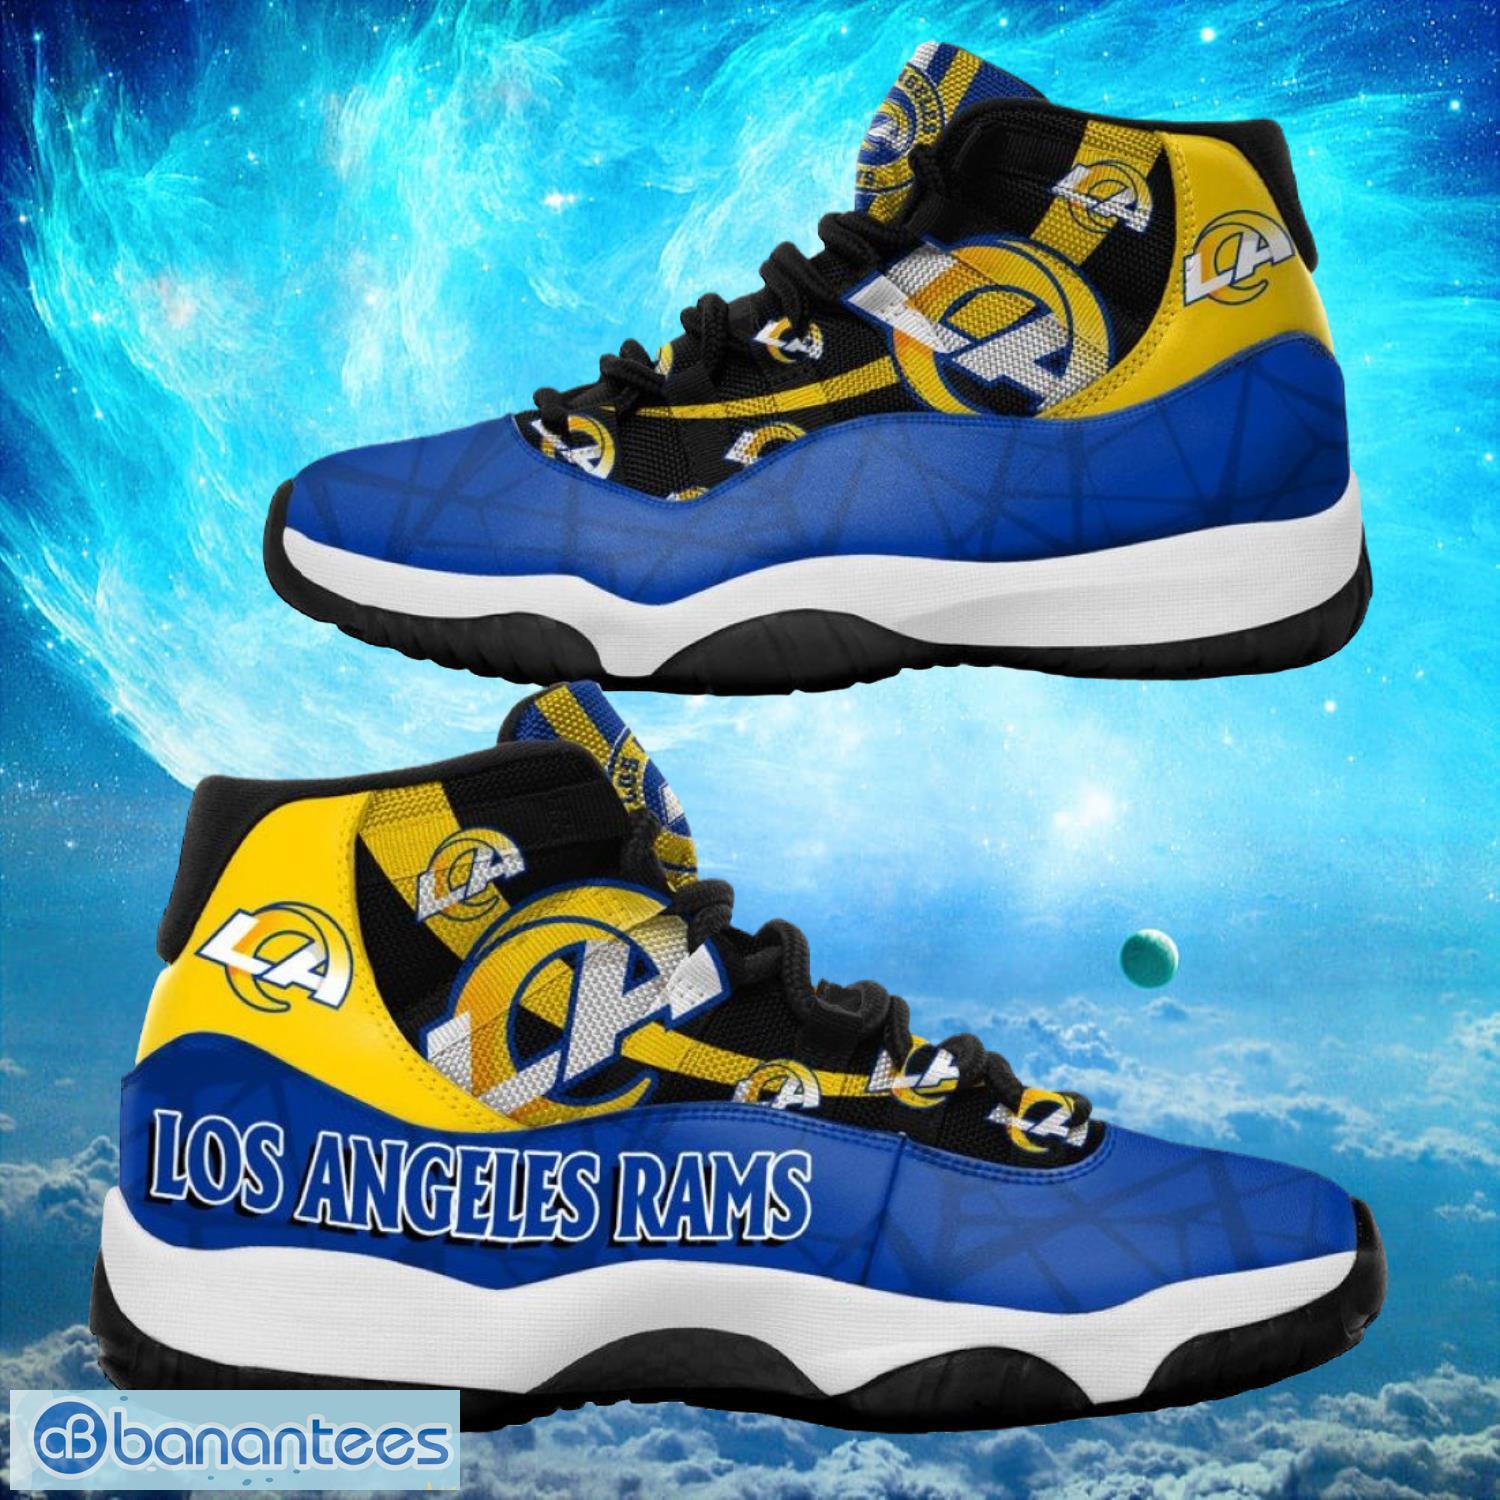 Los Angeles Rams NFL Air Jordan 11 Sneakers Shoes Gift For Fans Product Photo 1